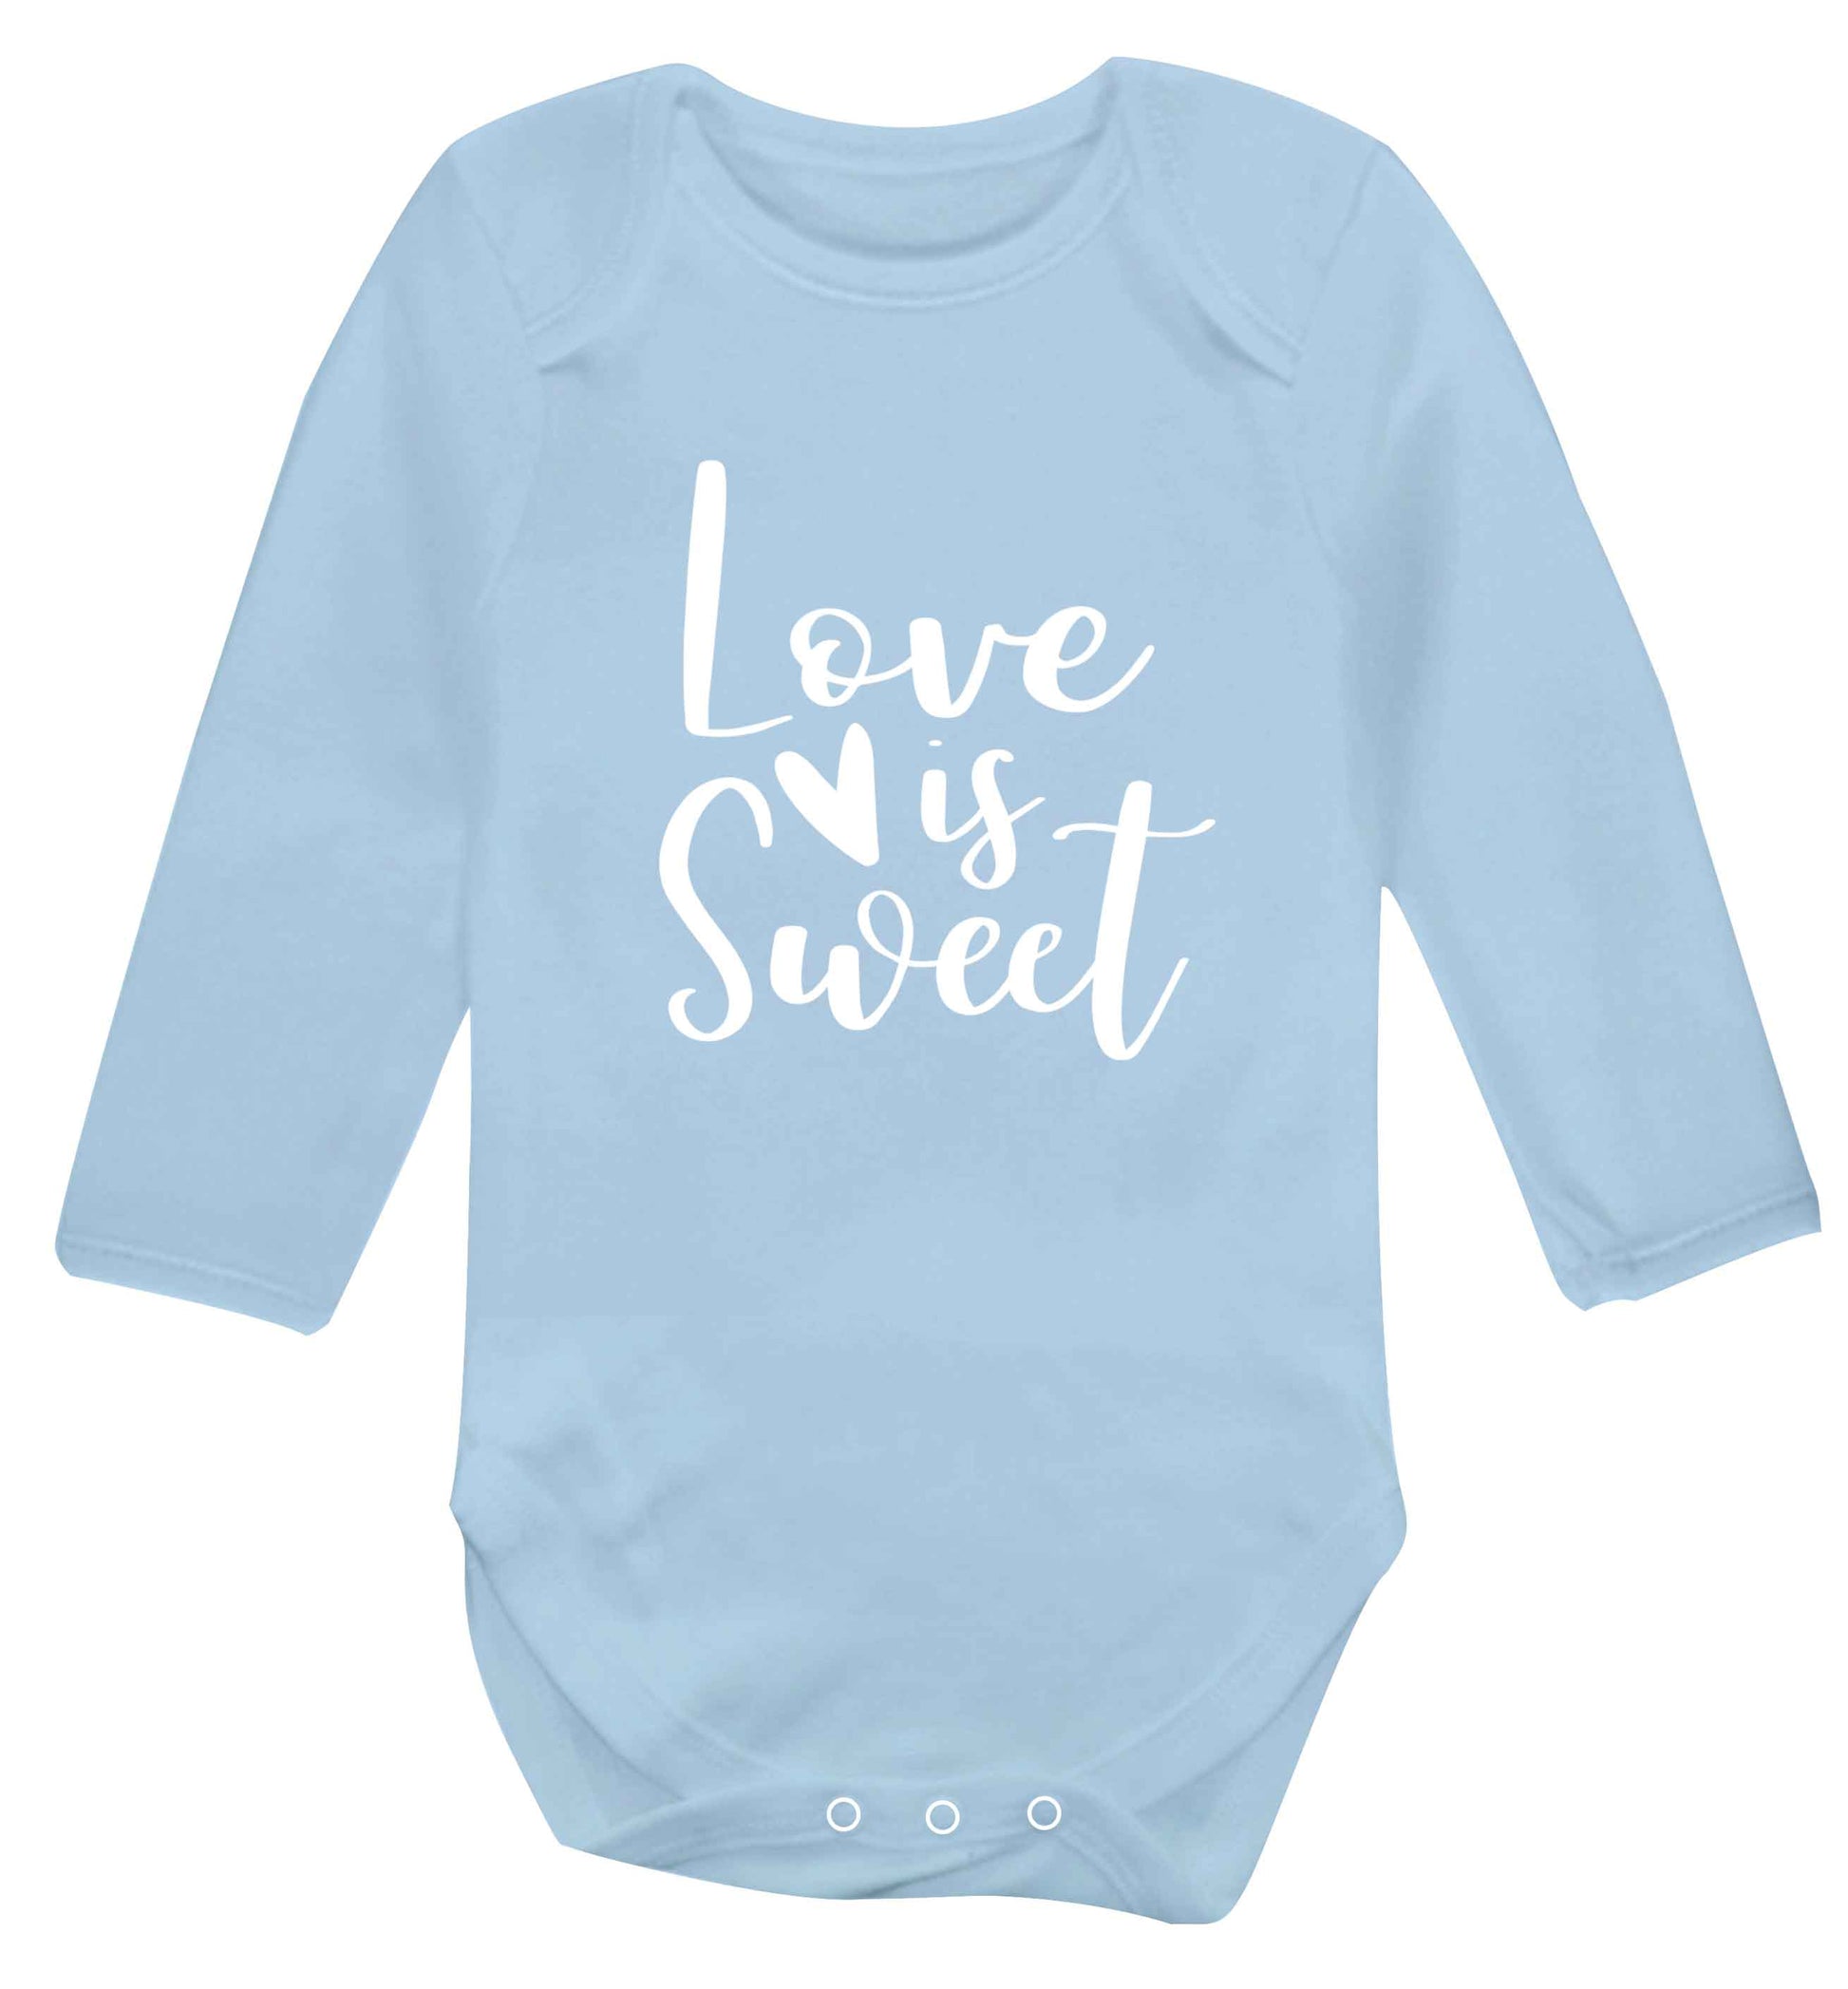 Love really does make the world go round! Ideal for weddings, valentines or just simply to show someone you love them!  baby vest long sleeved pale blue 6-12 months